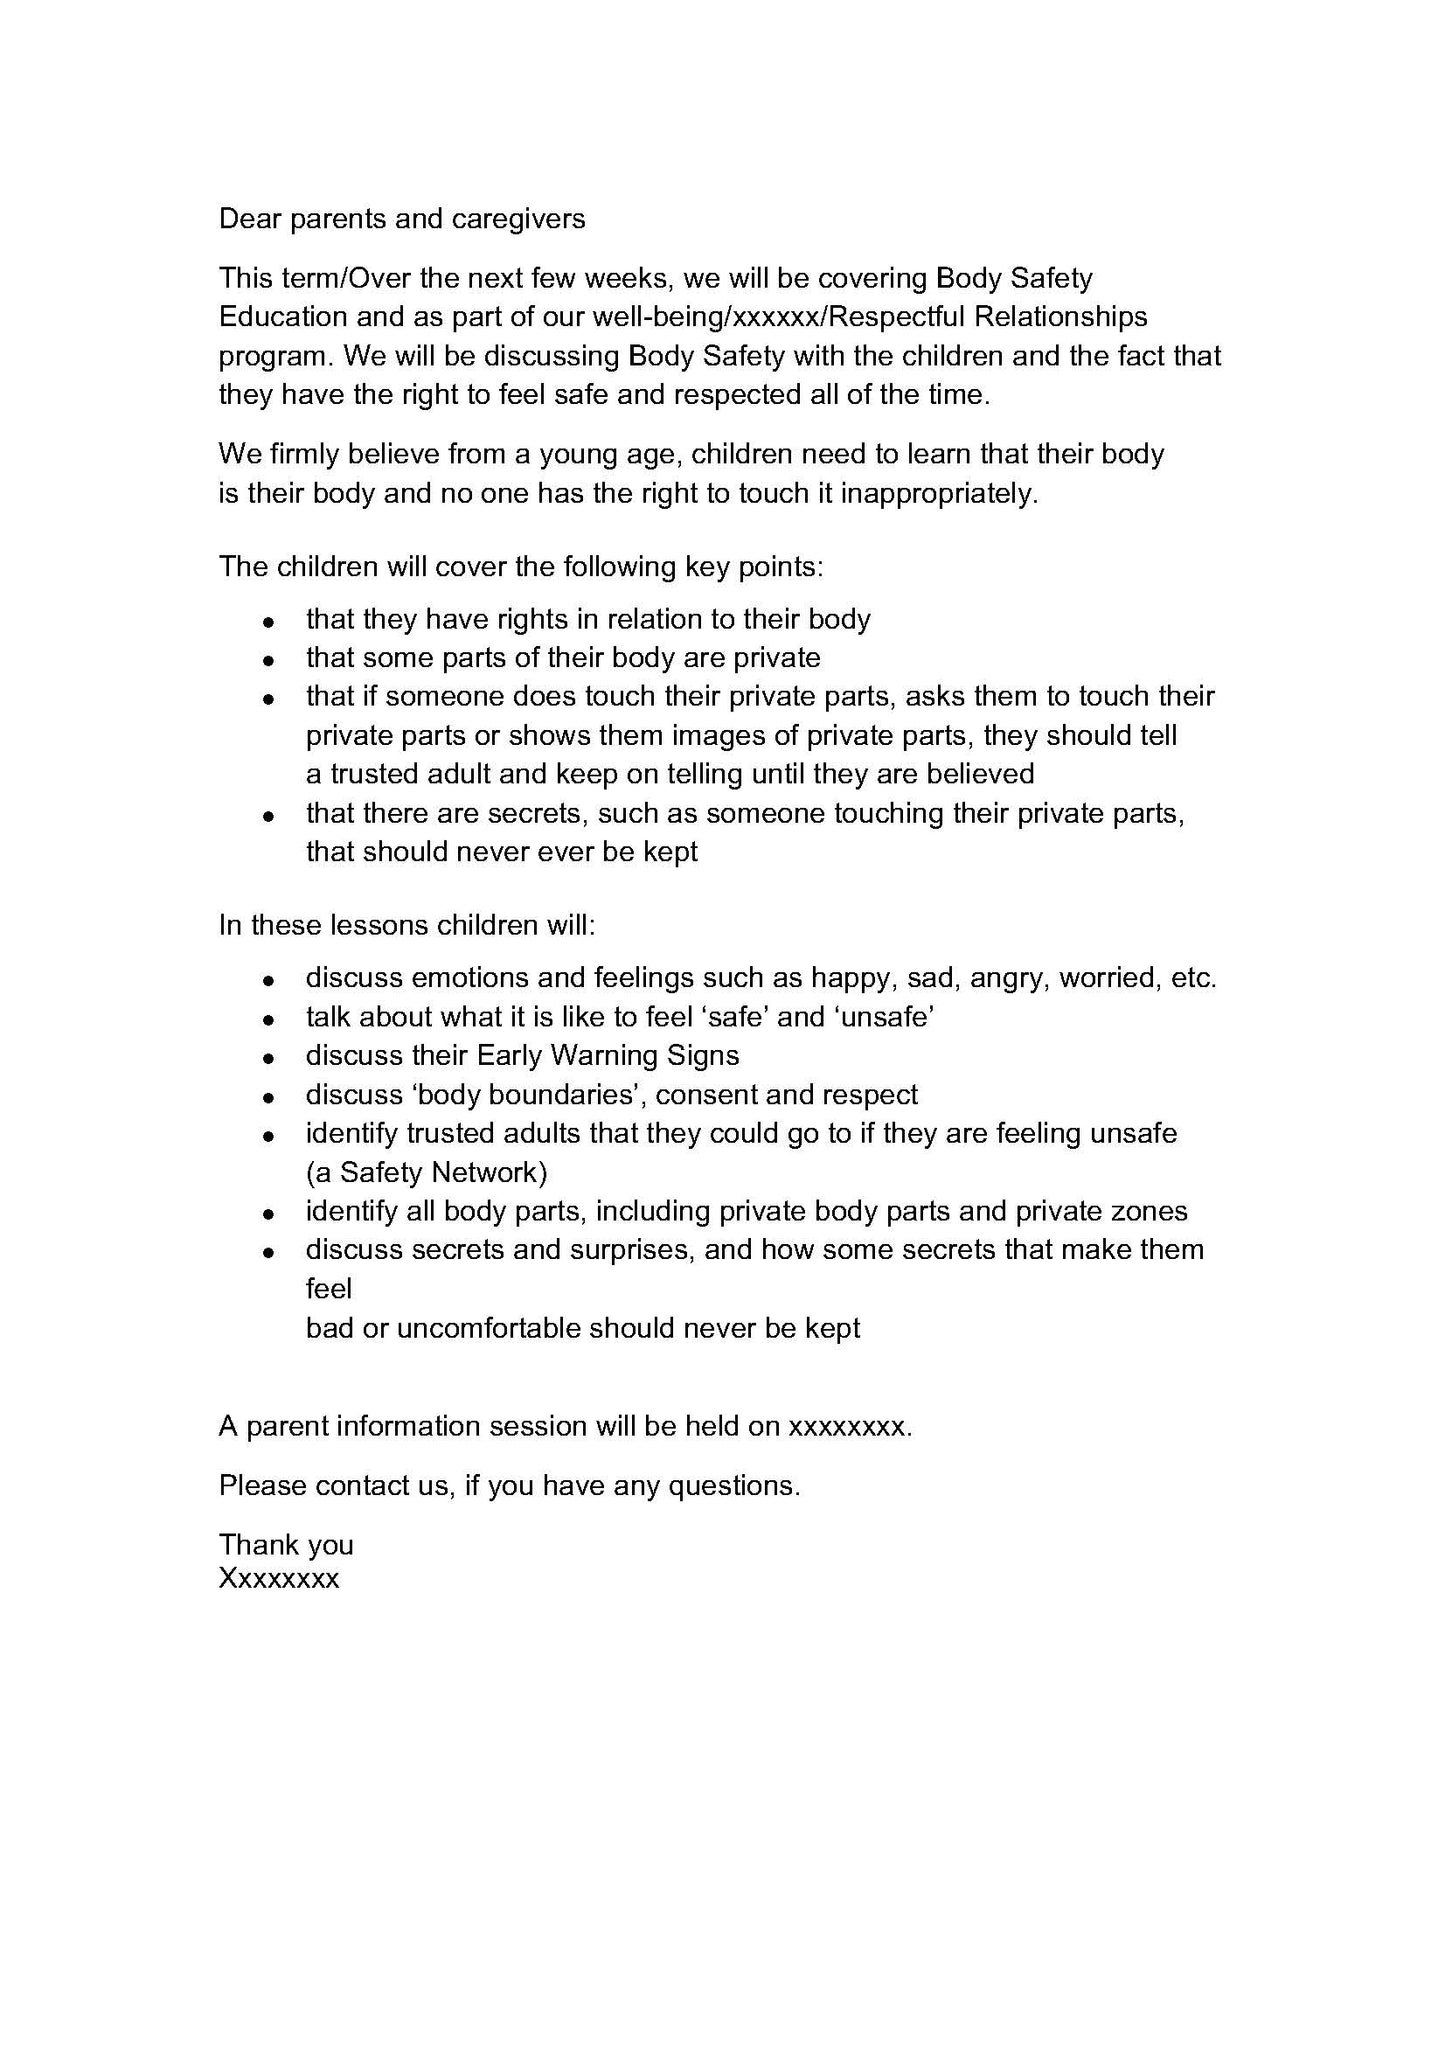 Body Safety Education Program - Sample Letter to Parents